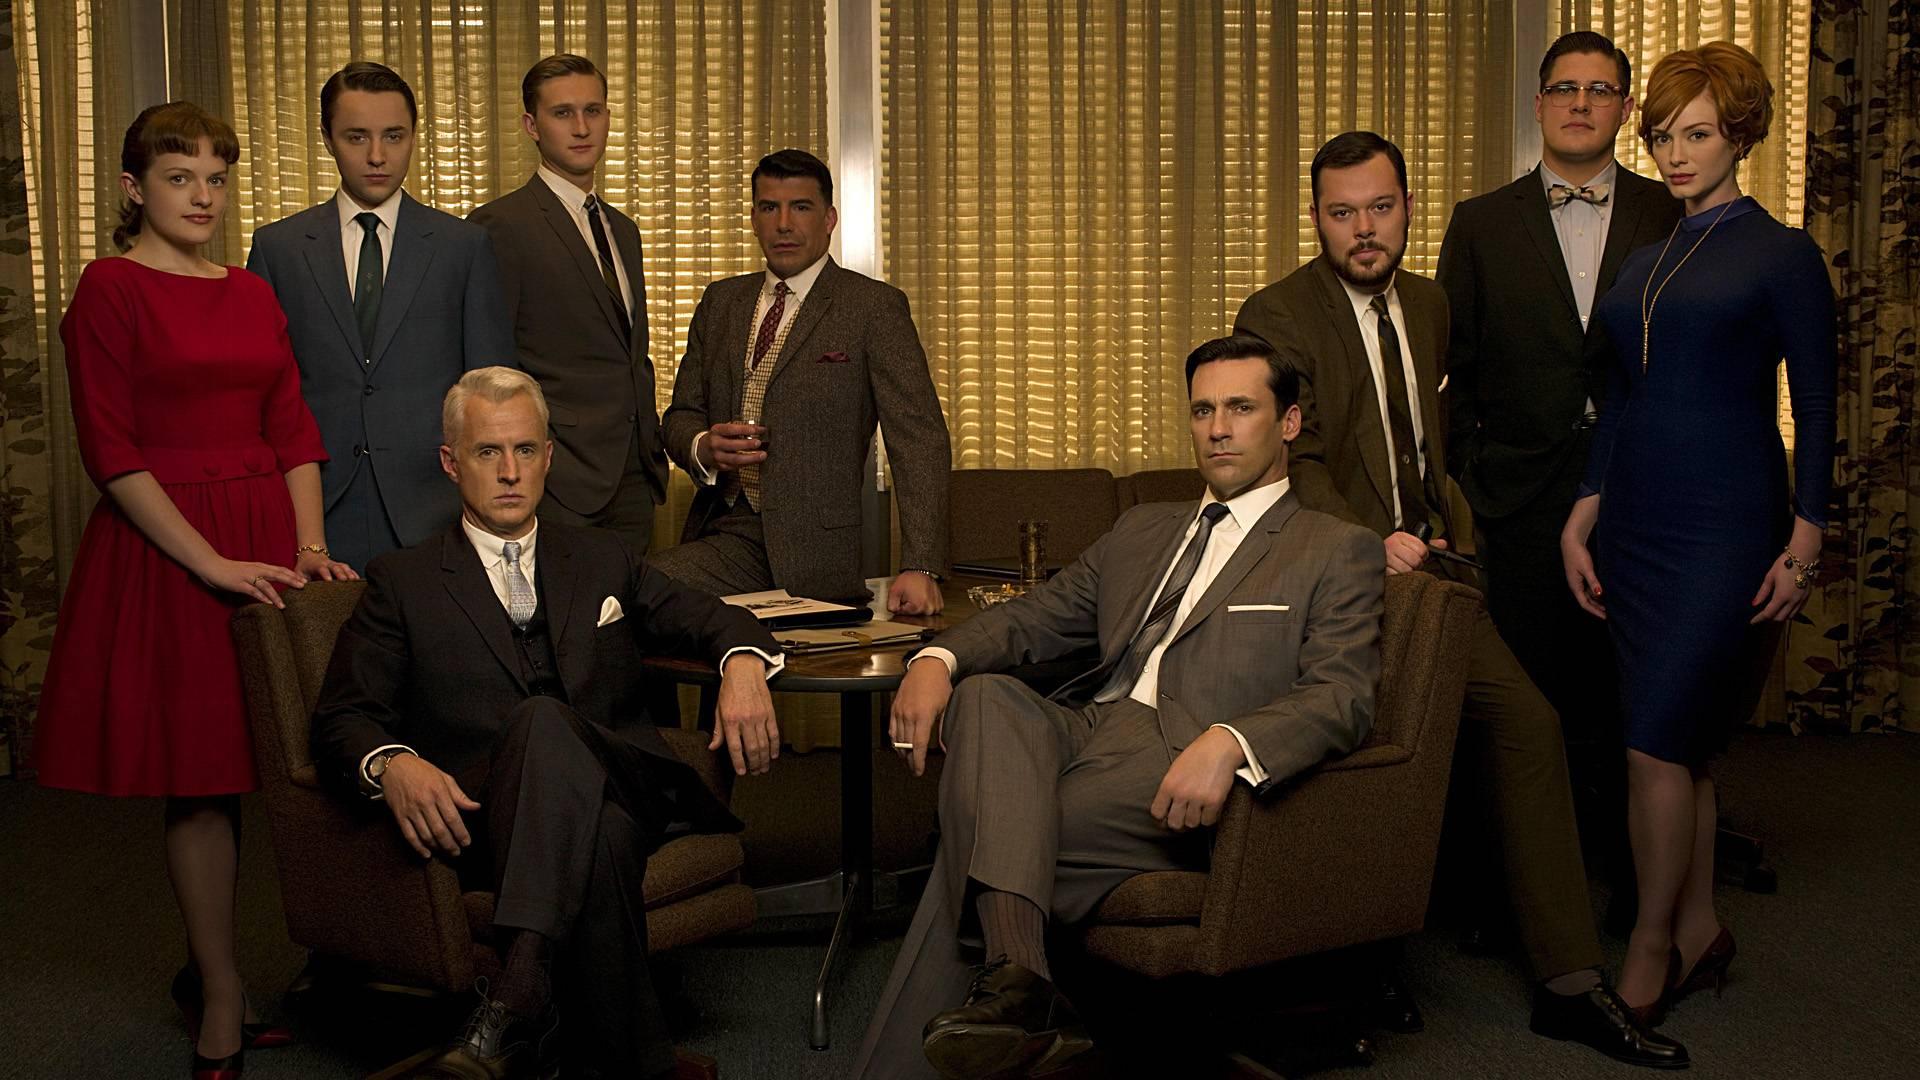 Cover Image for Maybe the Ad Execs of “Mad Men” fame were in the Wrong Business …